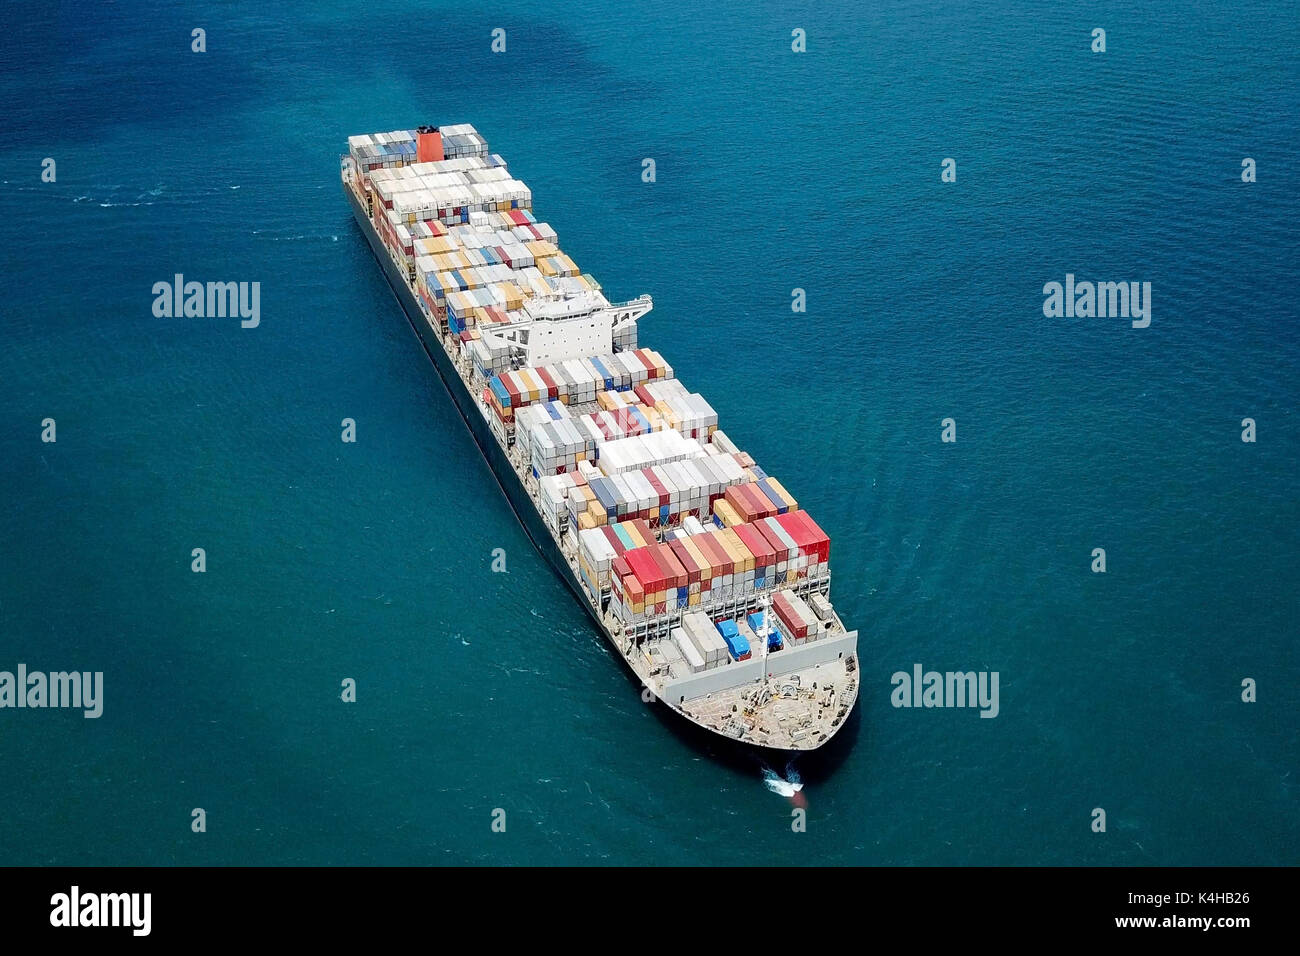 Ultra large container vessel (ULCV) at sea - Aerial image Stock Photo